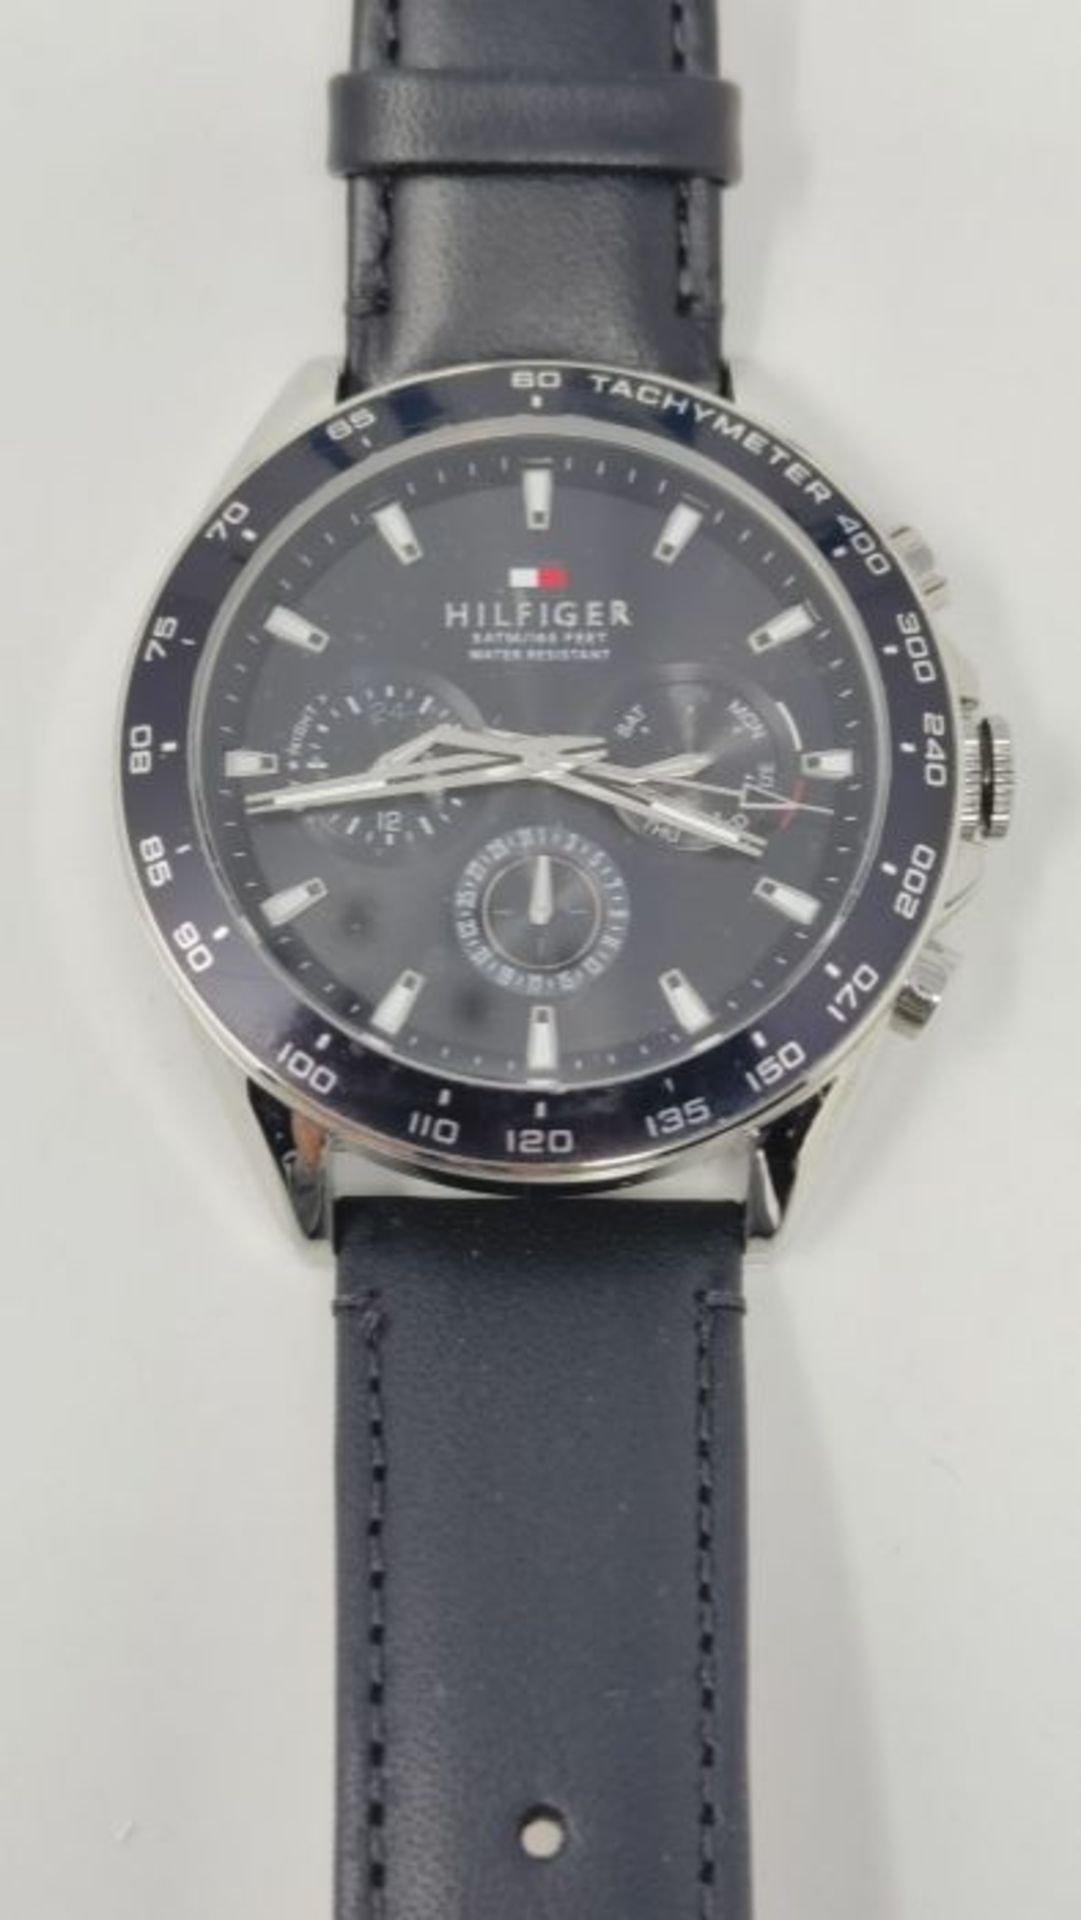 RRP £179.00 Tommy Hilfiger Men's Analog Quartz Watch with Leather Strap 1791964 - Image 3 of 3